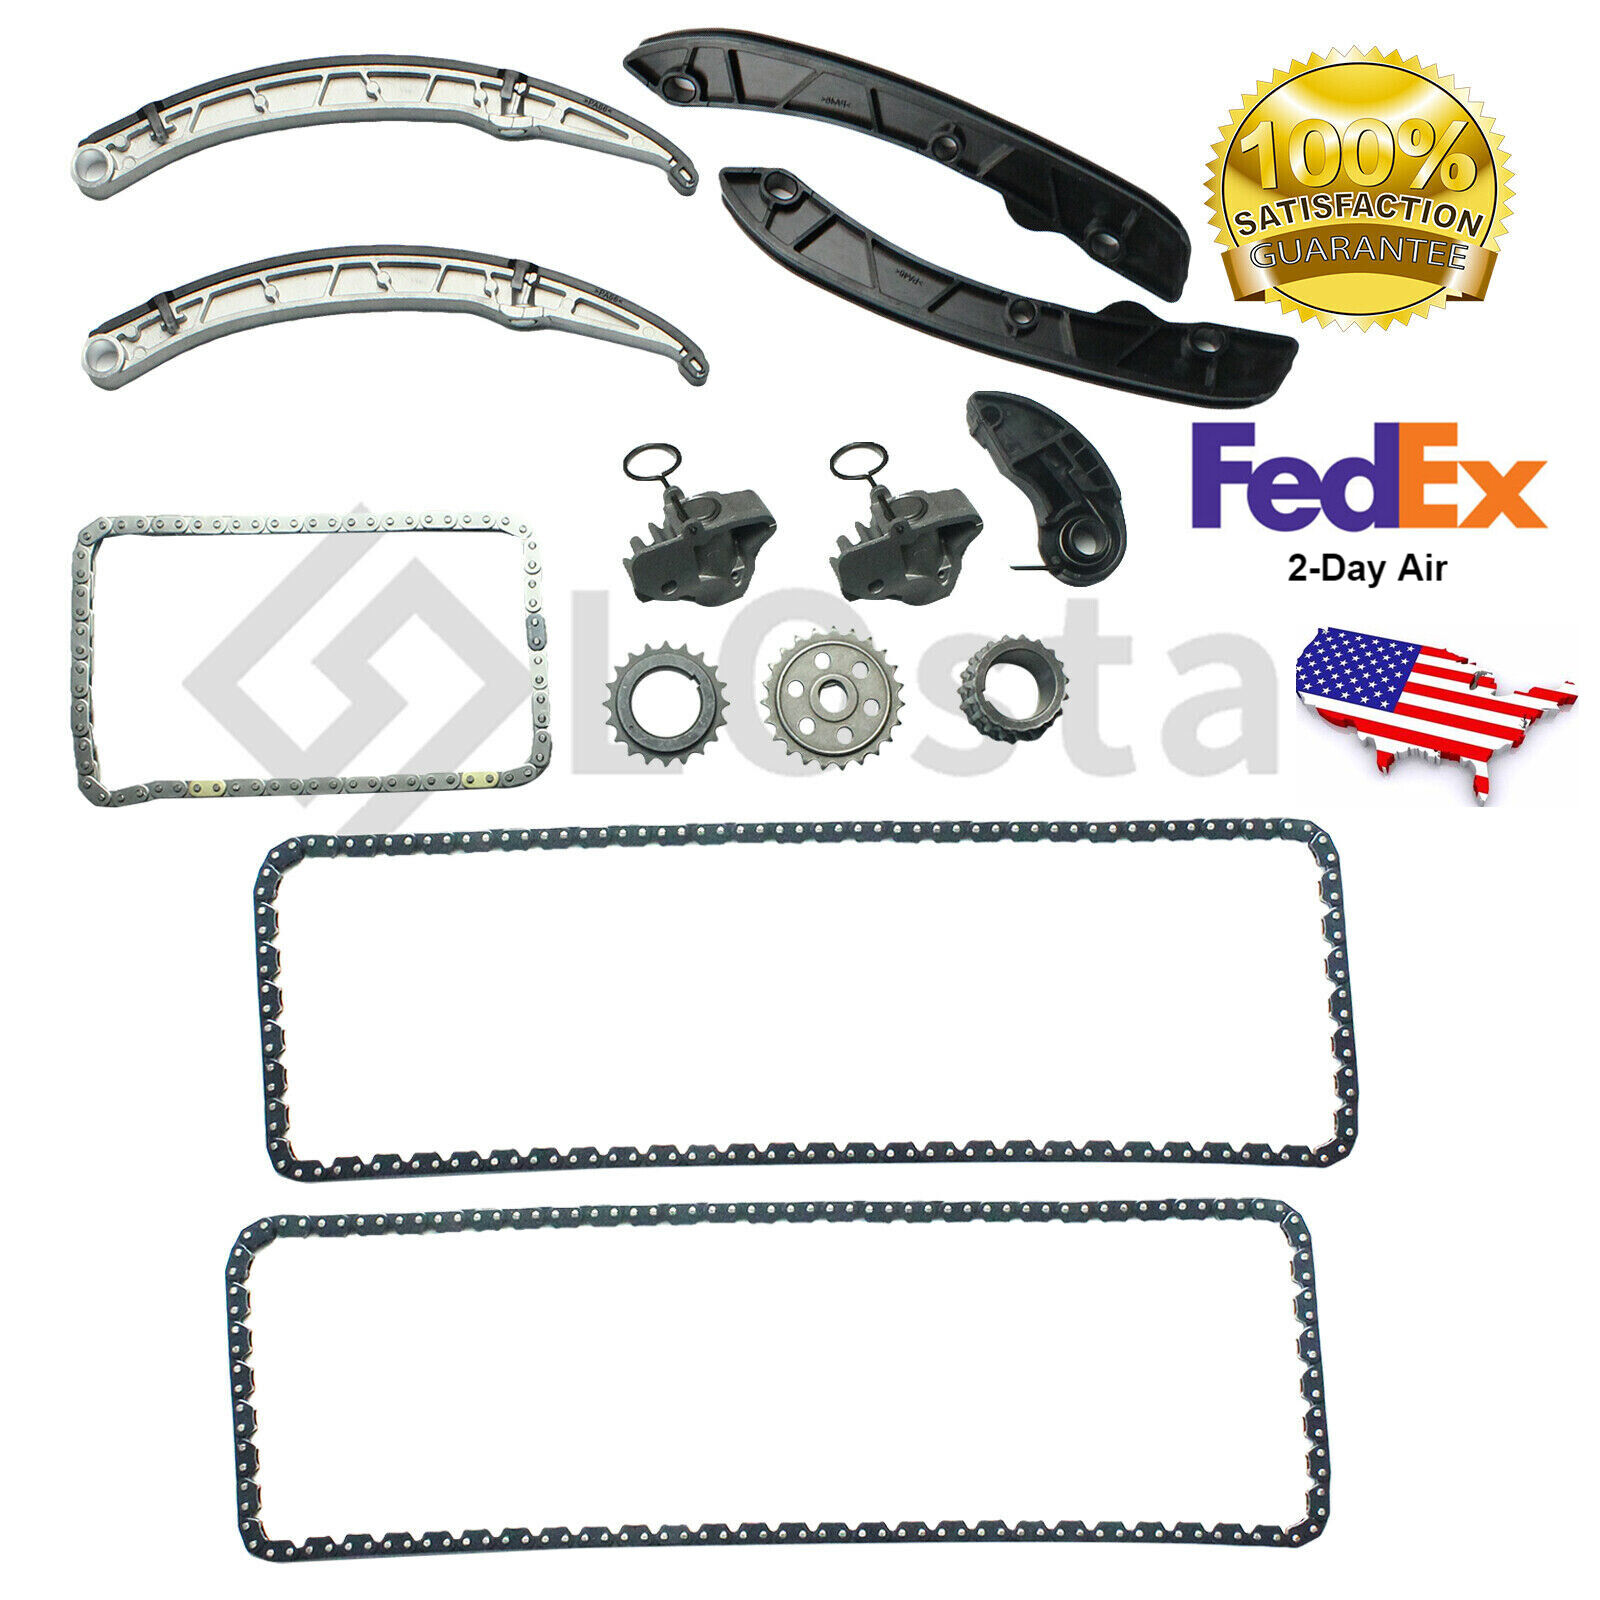 New Timing Chains kit Fits  Range Rover Sport LR4 With Rails Guide W/ Tensioners